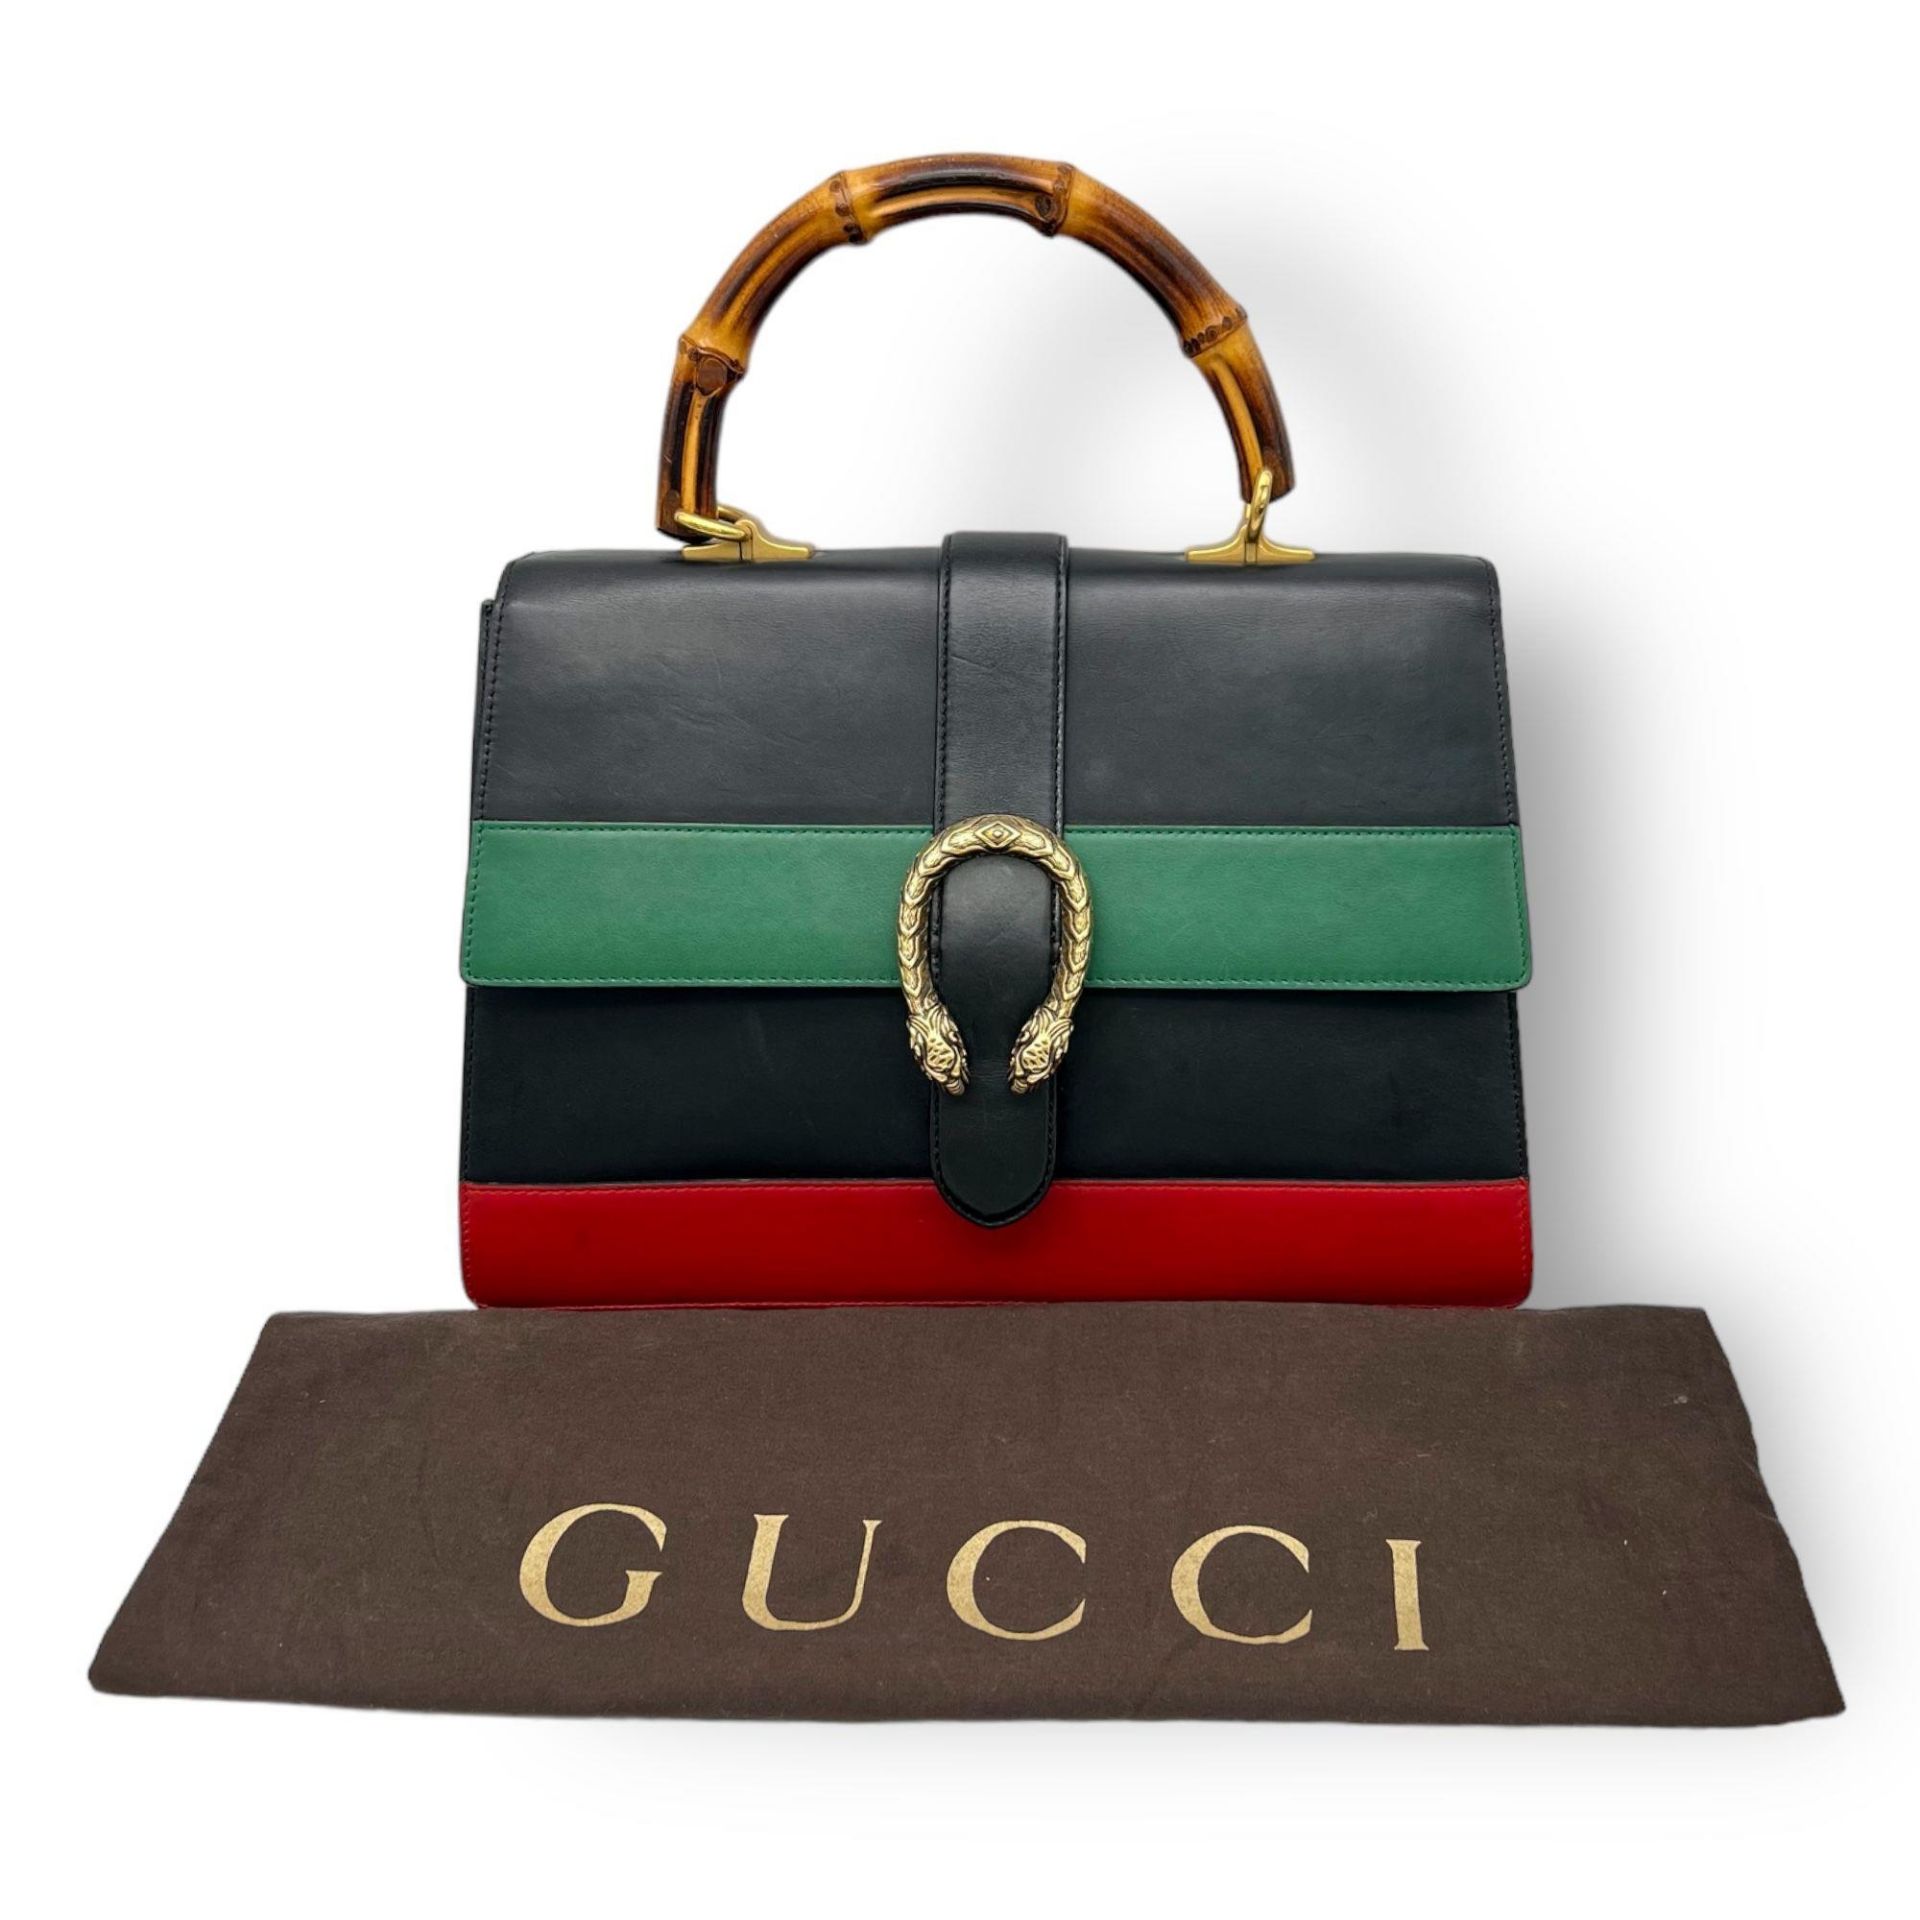 A Gucci Dionysus Bamboo Multi-Colour Leather Handbag with Dust Cover. Red, green and black - Bild 6 aus 9